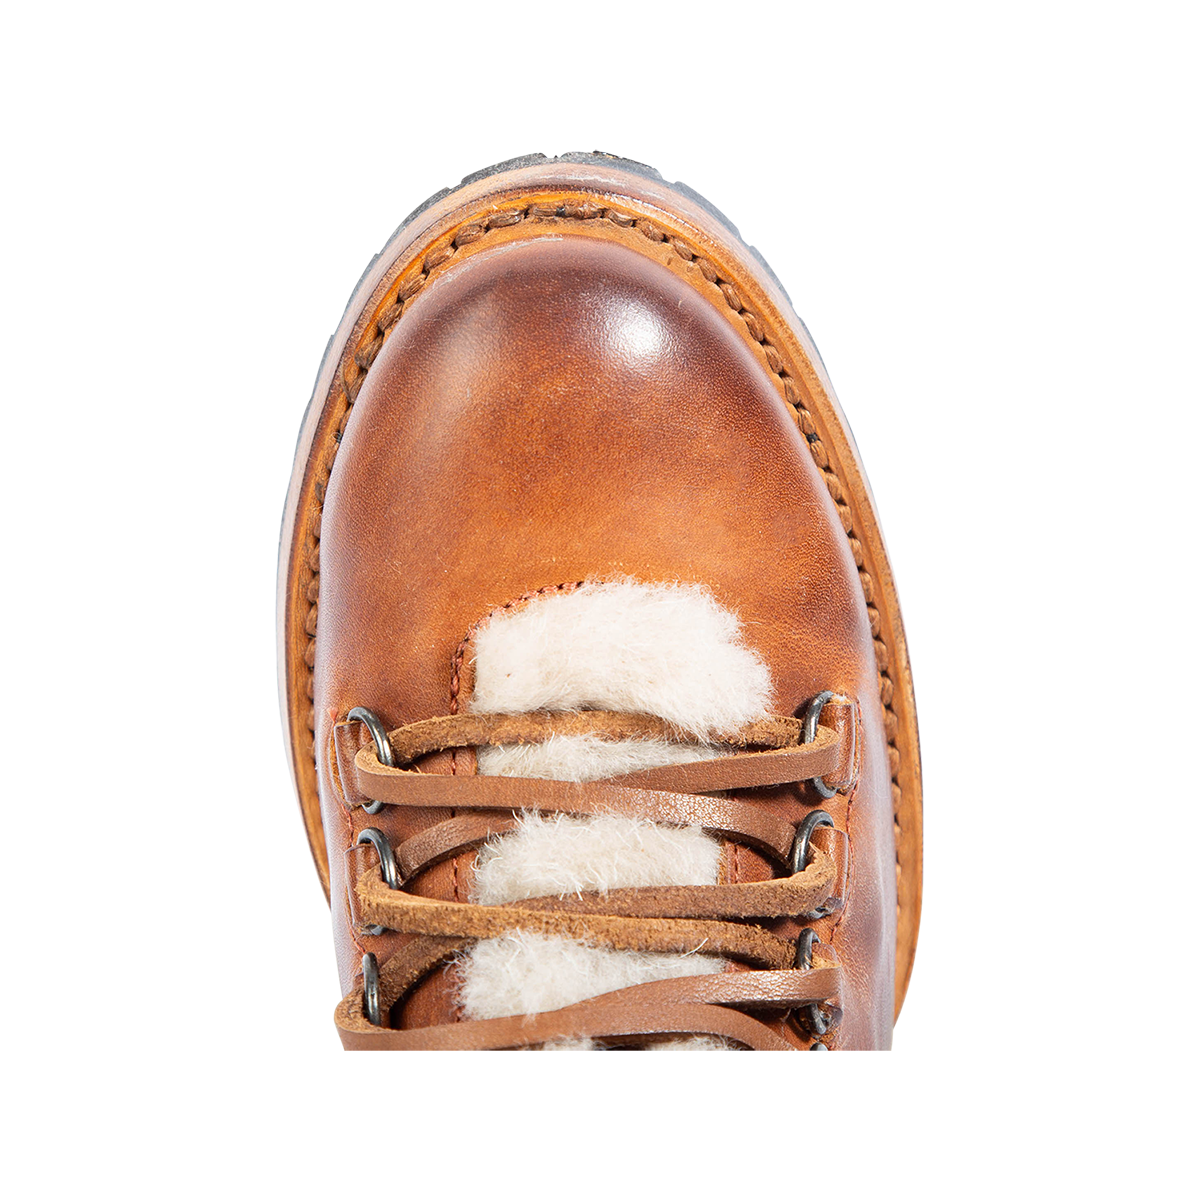 Top view showing round toe and shearling tongue on FREEBIRD women's Norway tan leather bootie